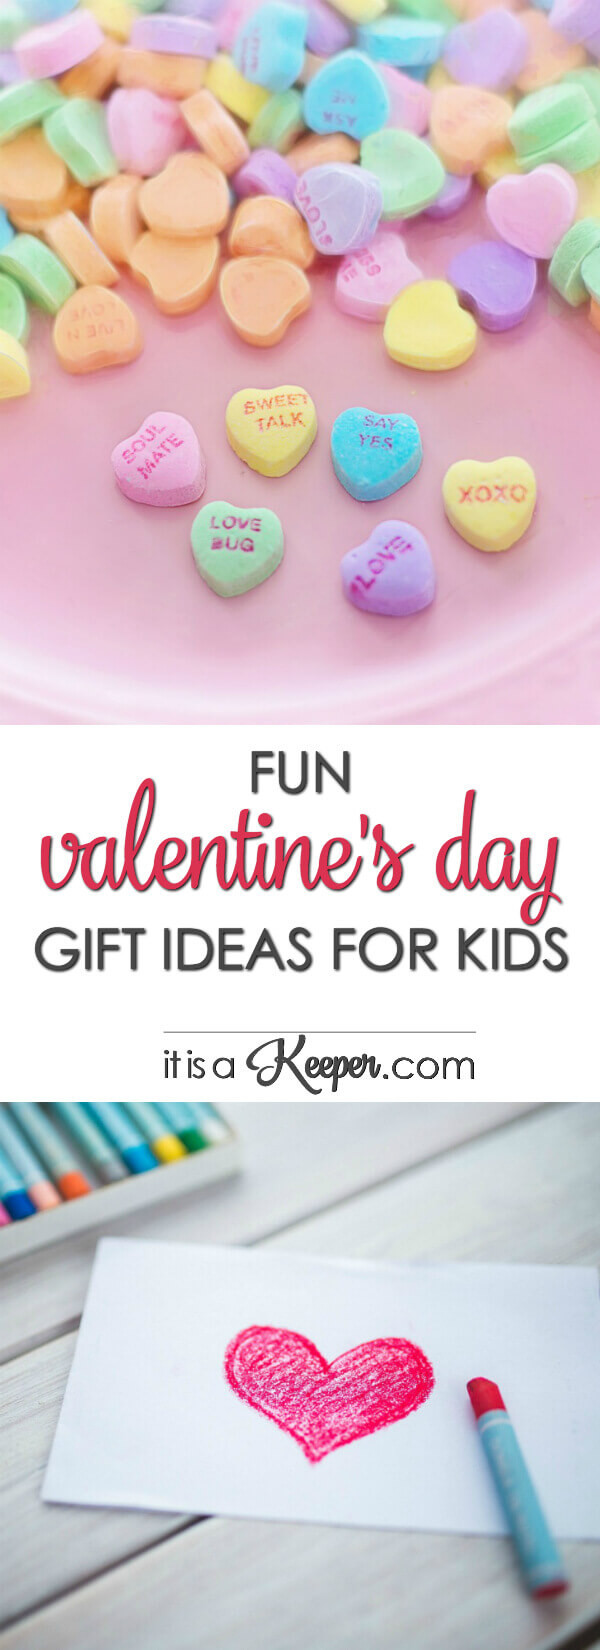 Valentine'S Day Gift Ideas For Parents
 Fun Valentine s Day Gift Ideas for Kids